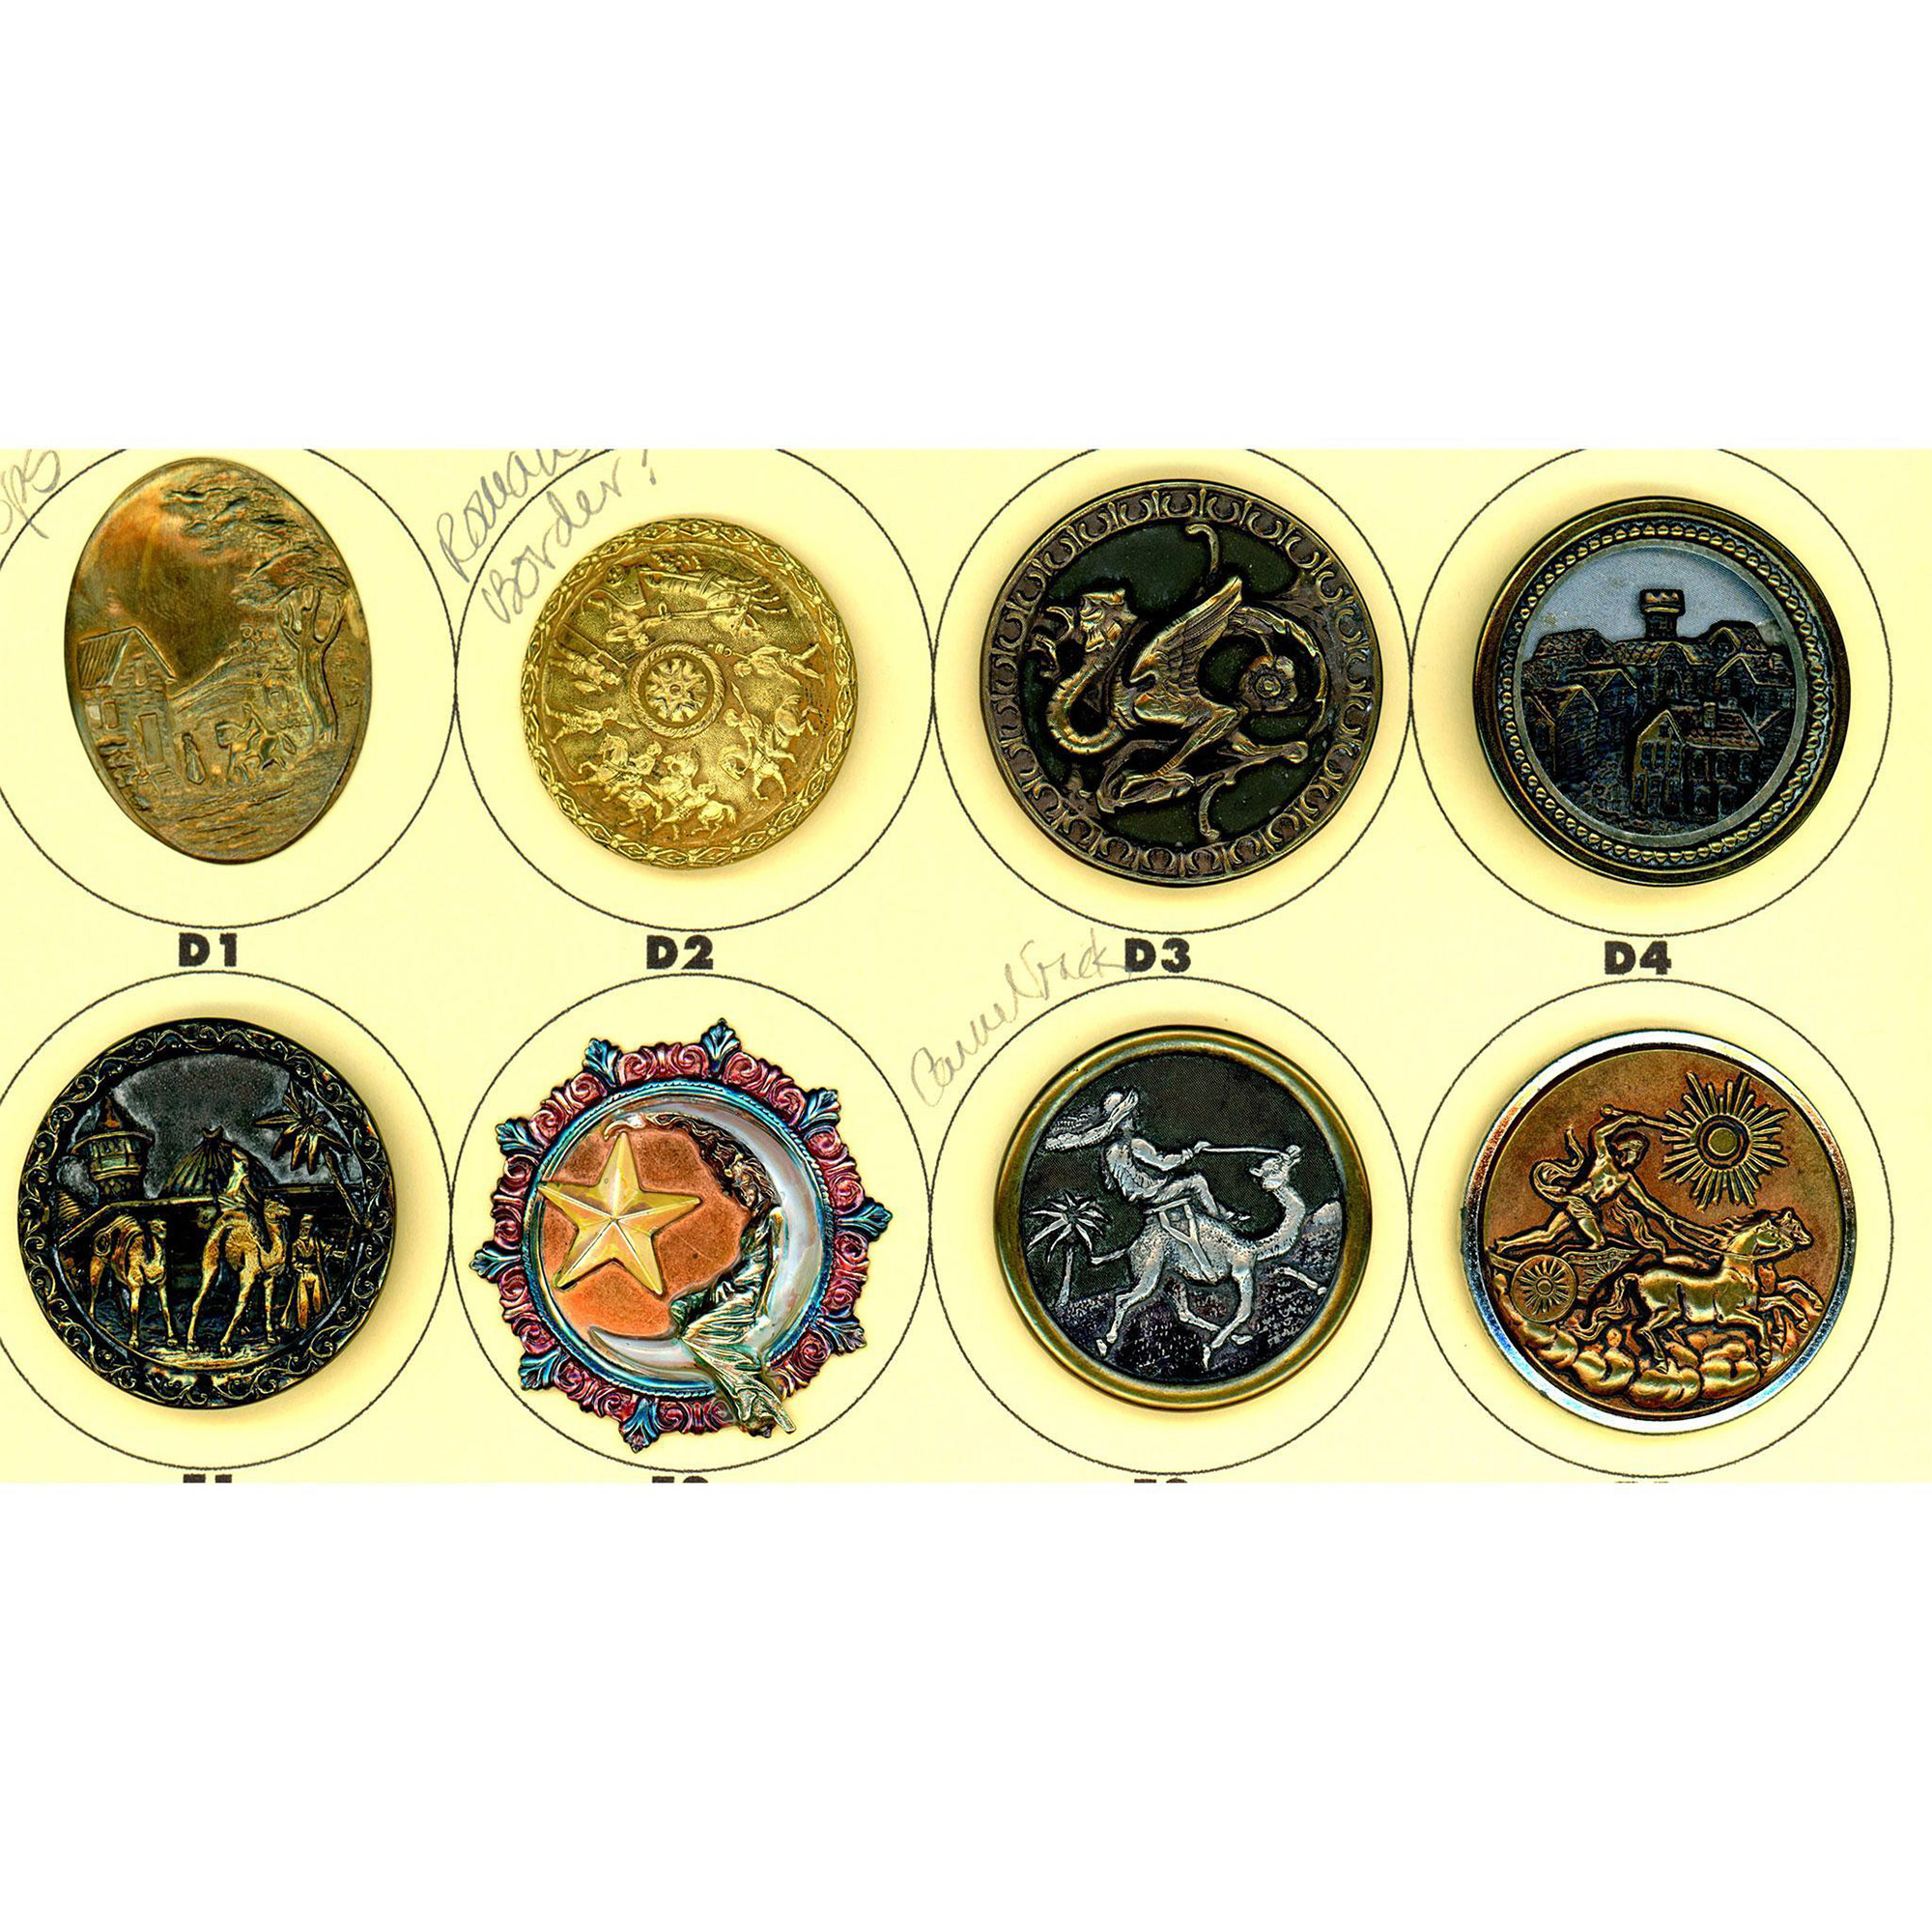 A partial card of metal pictorial buttons